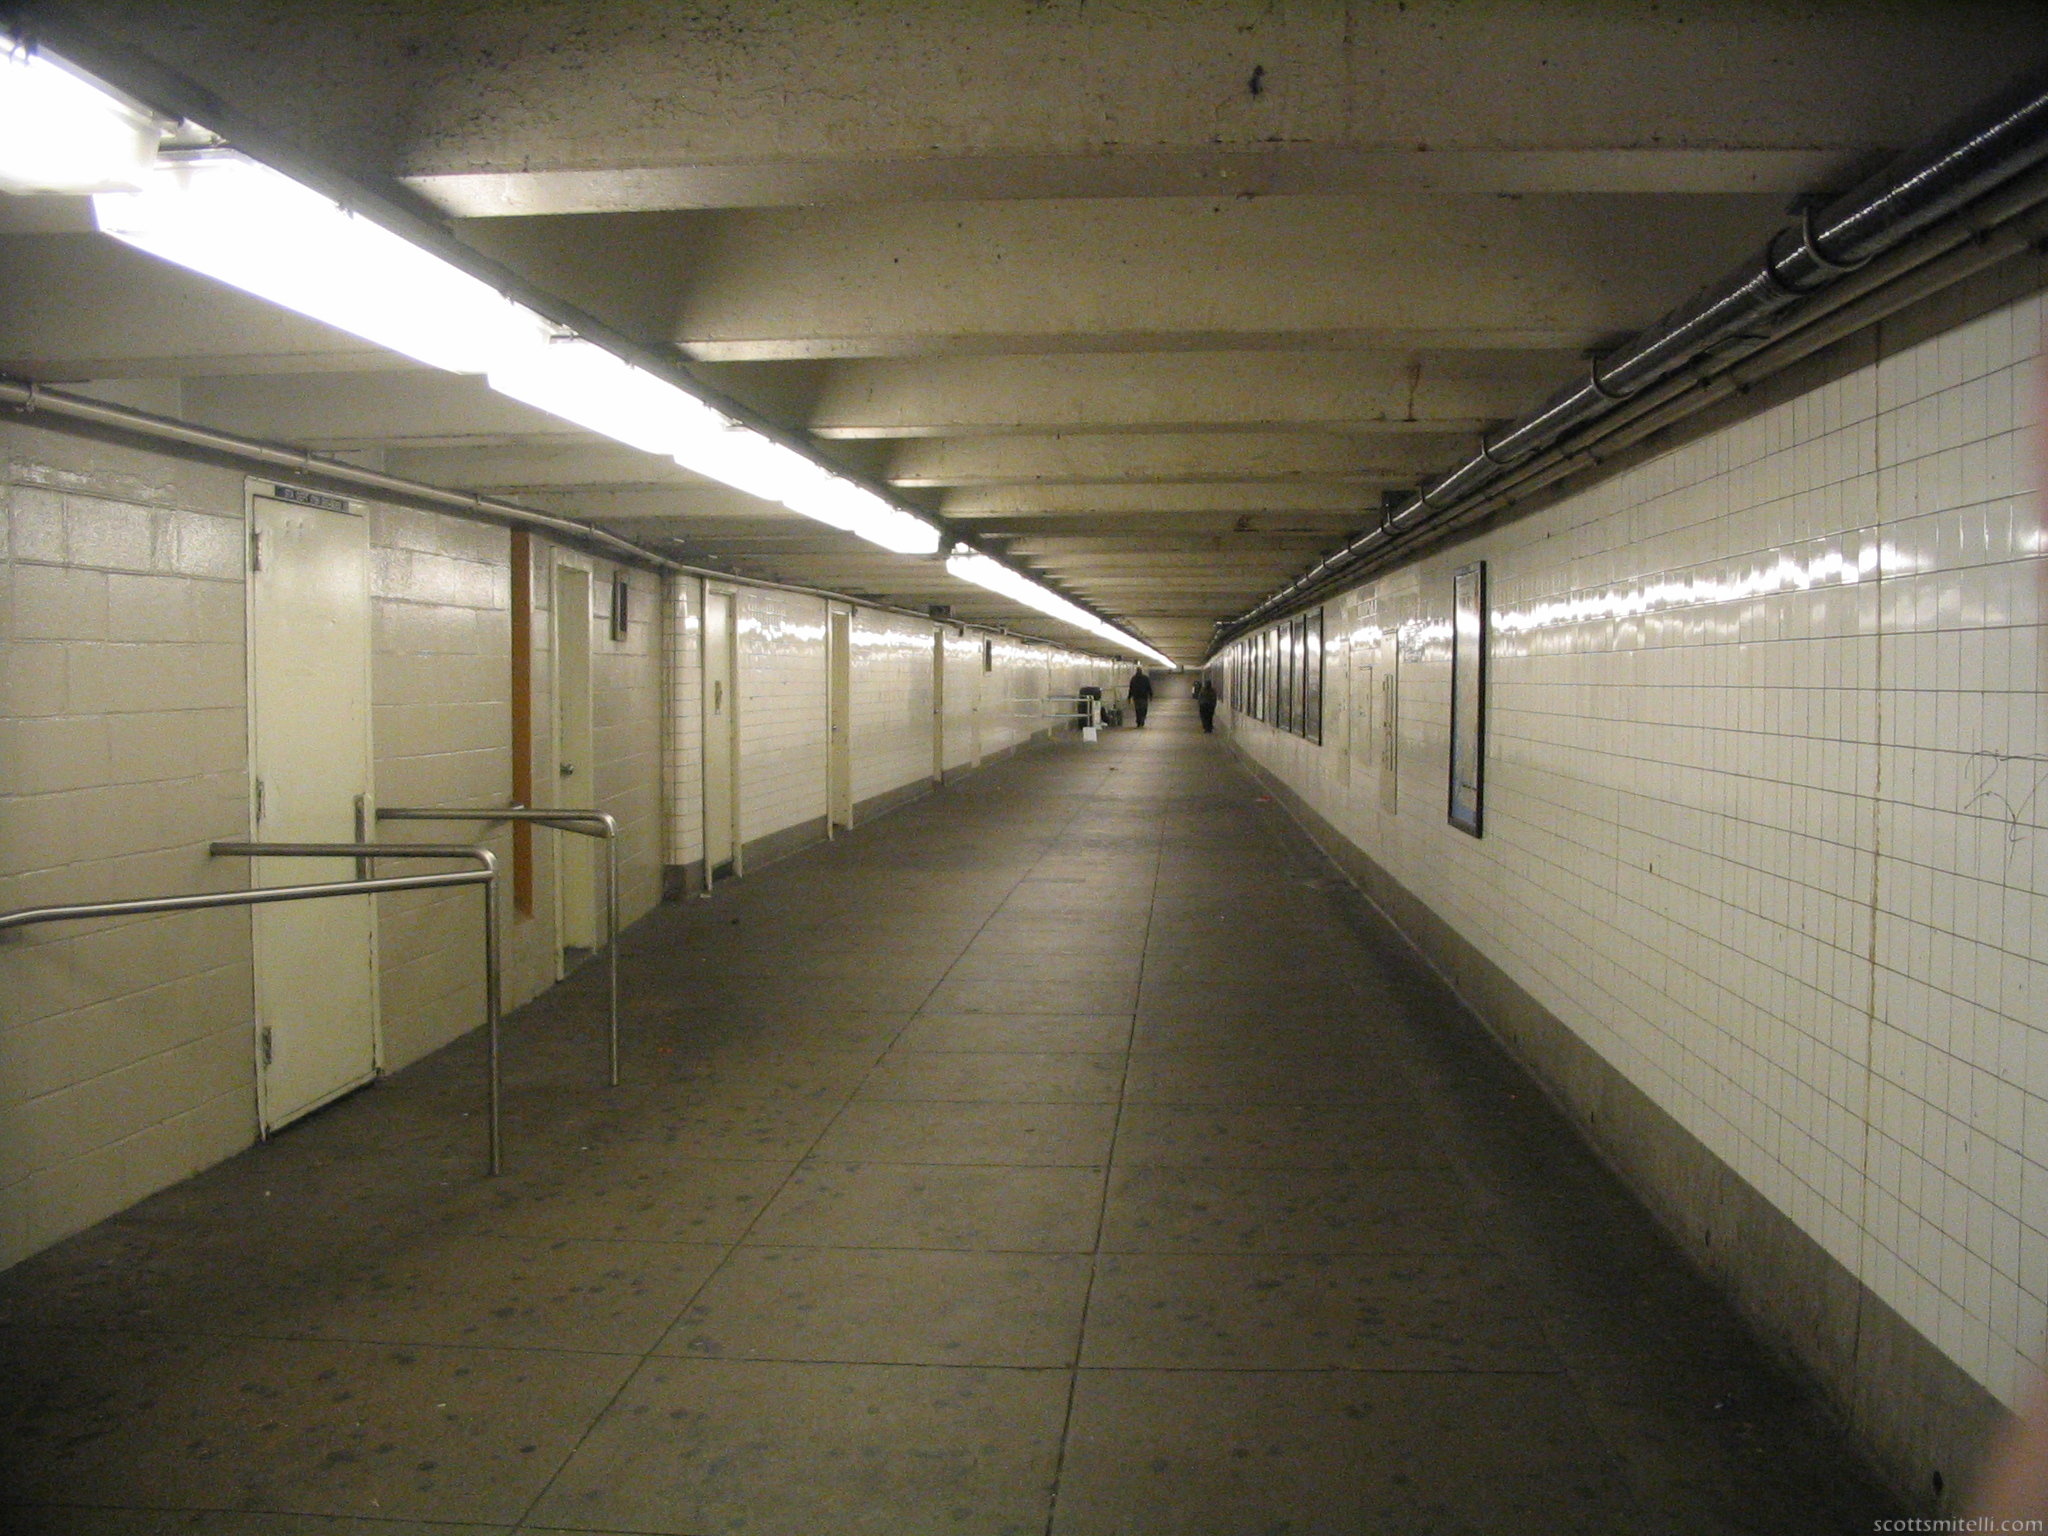 A creepy morning in the 14th Street tunnels.